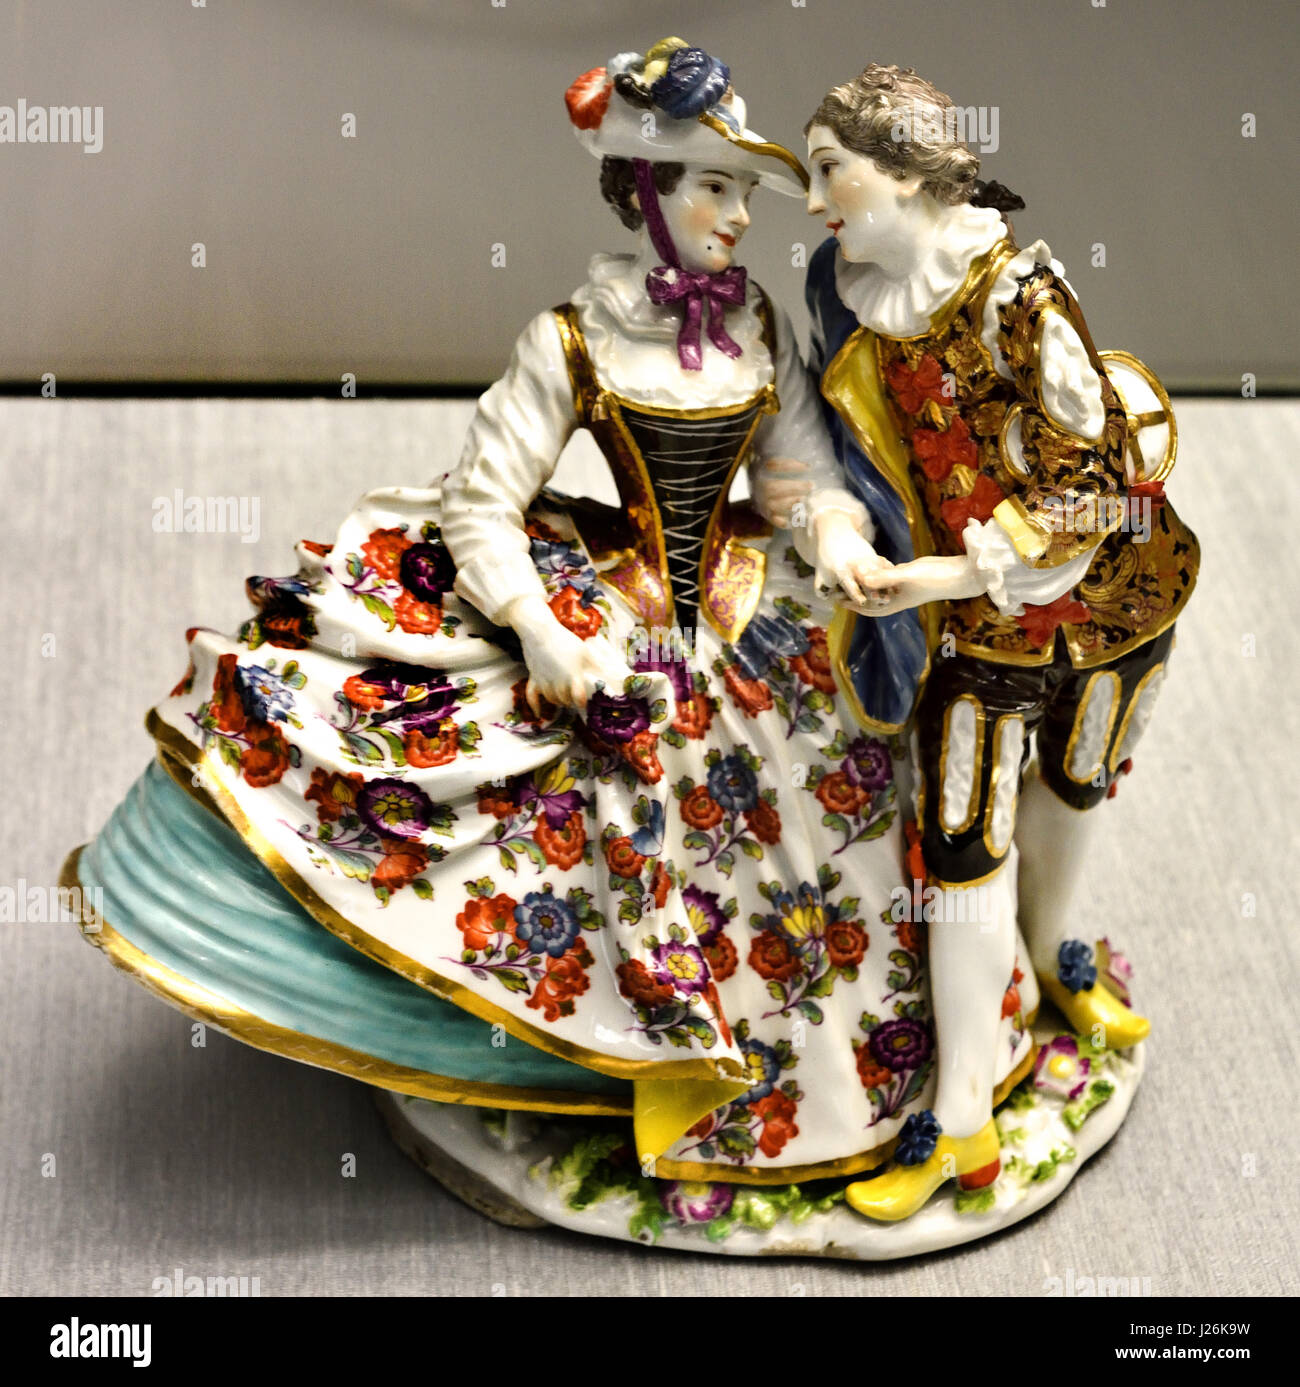 Liebespaar mit Vogelbauer - Loving couple with birdcage 1737-1740, by Johann Joachim Kändler ,1706 – 1775) was the most important modeller of the Meissen porcelain manufactory. Germany Stock Photo